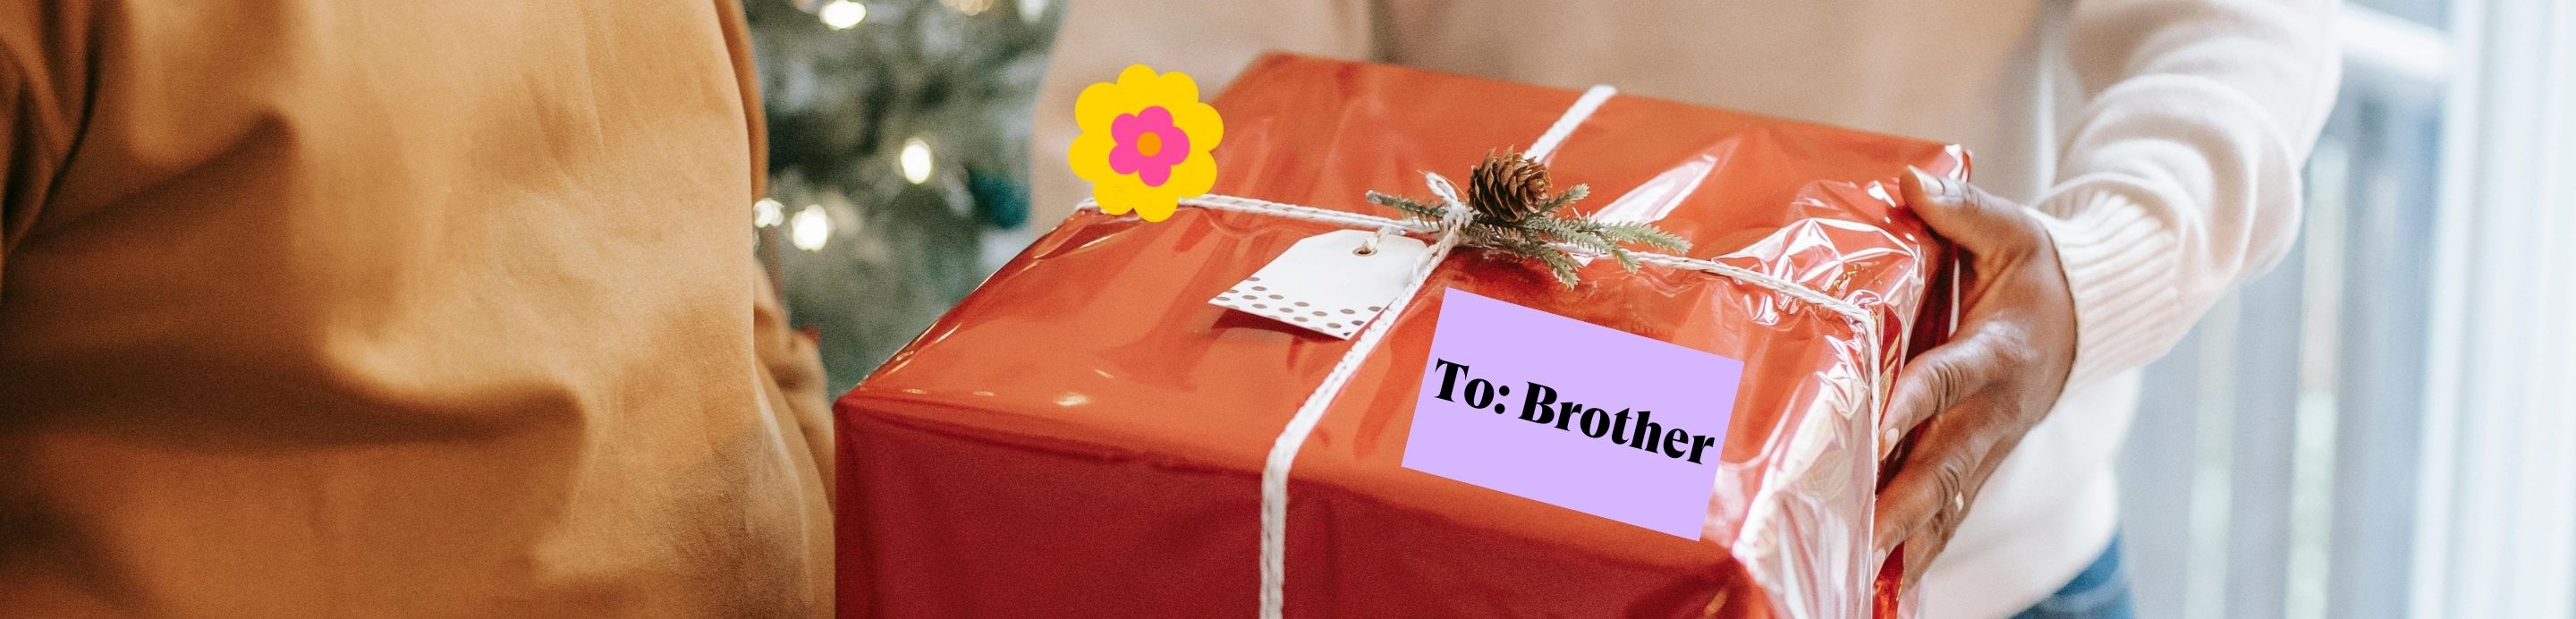 Christmas-gift-ideas-brother